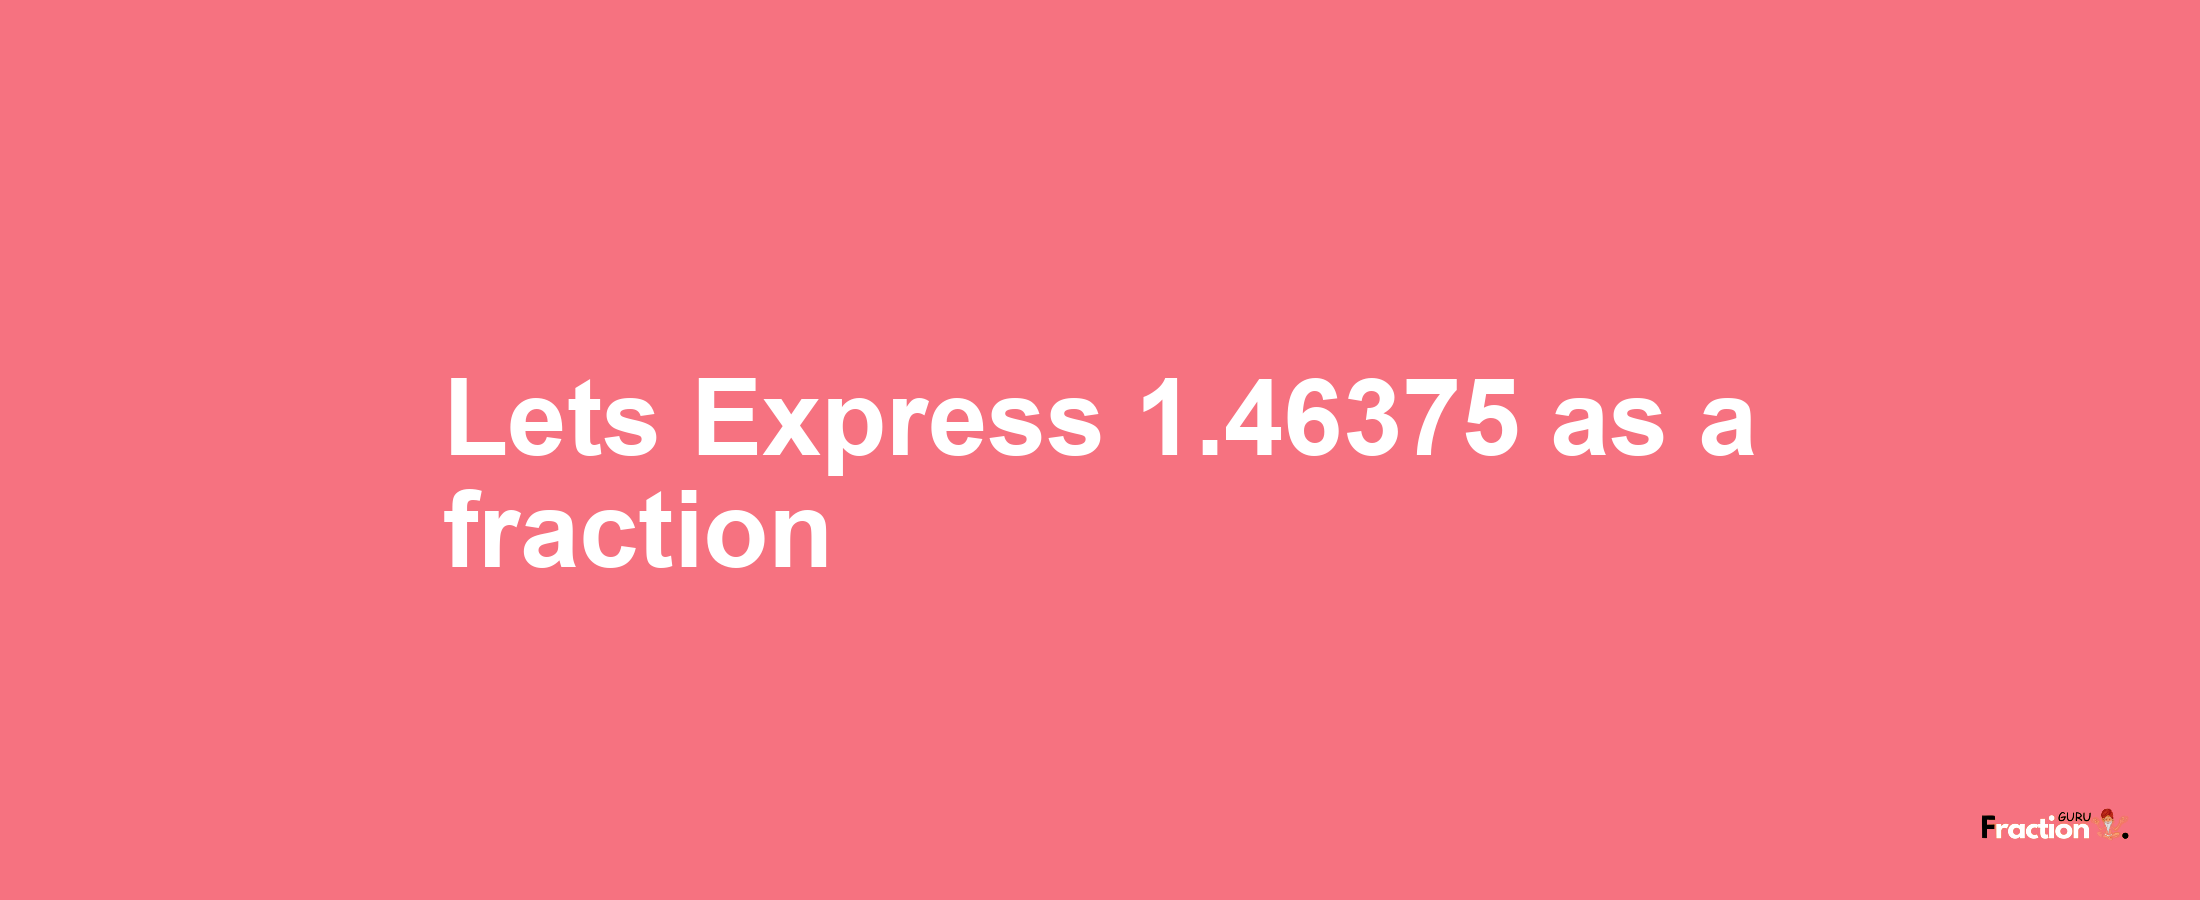 Lets Express 1.46375 as afraction